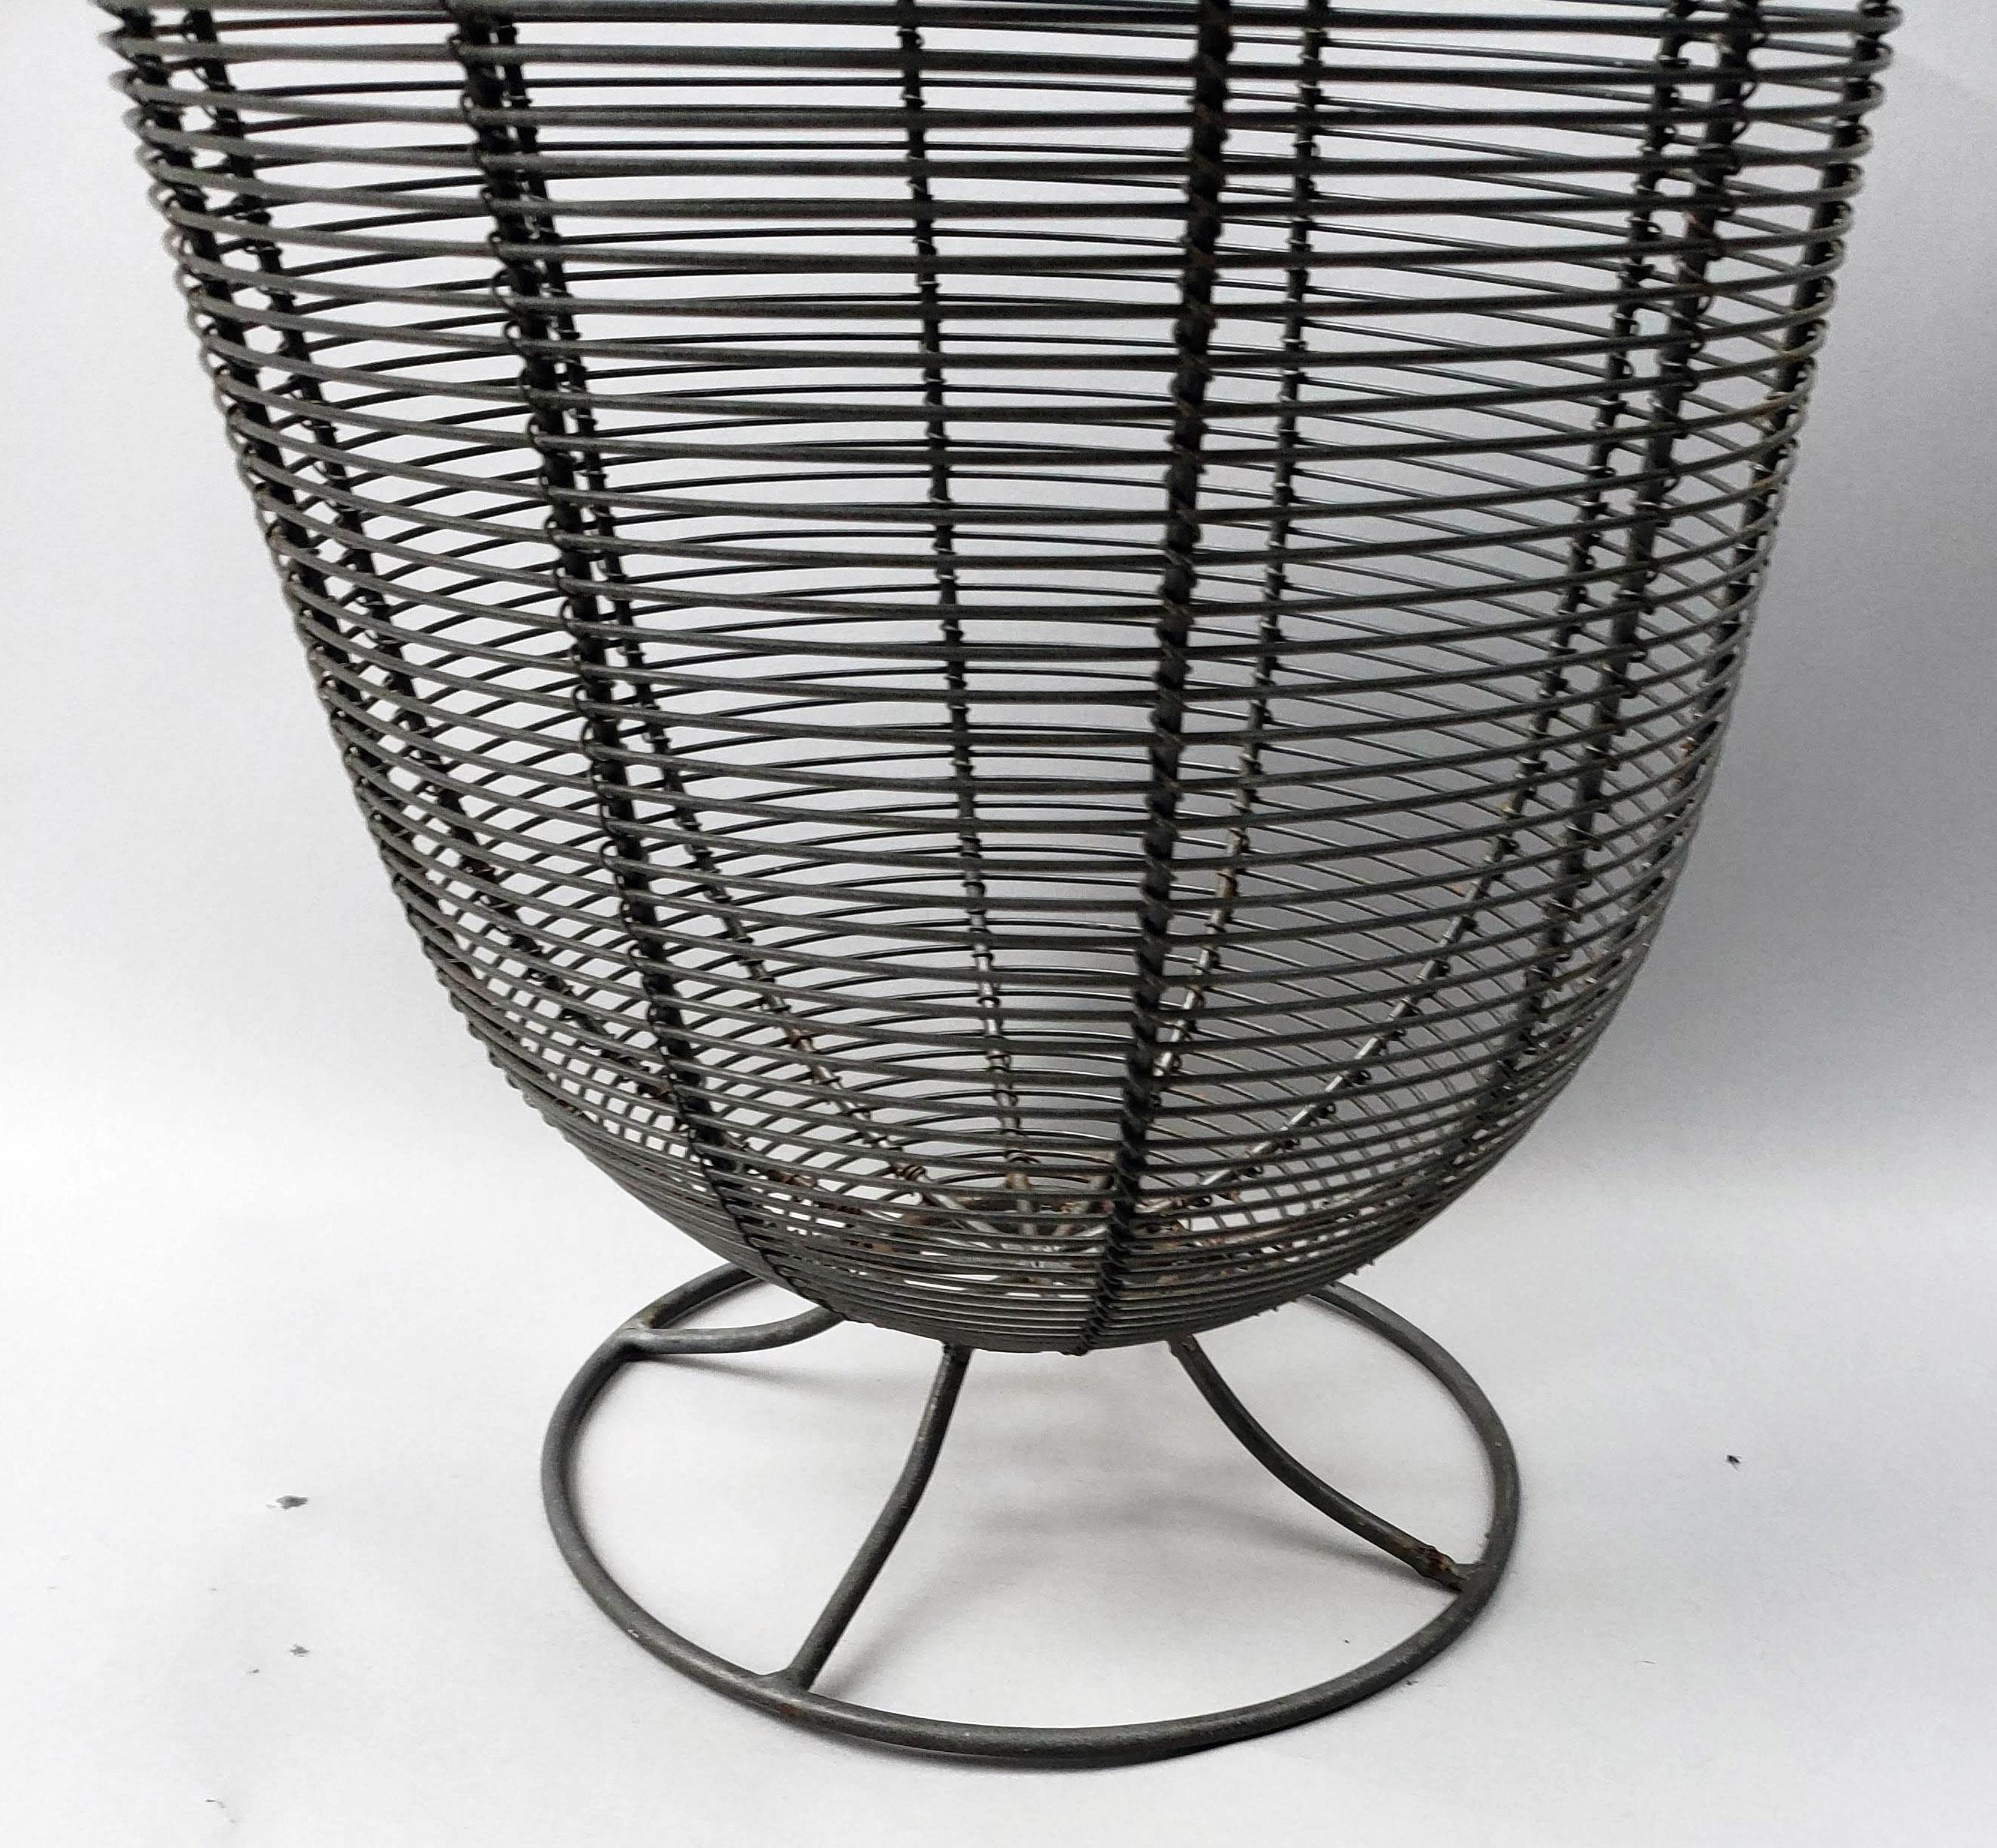 Mid-20th Century American Trumpet-Shaped Garden Wire Basket, 1940s For Sale